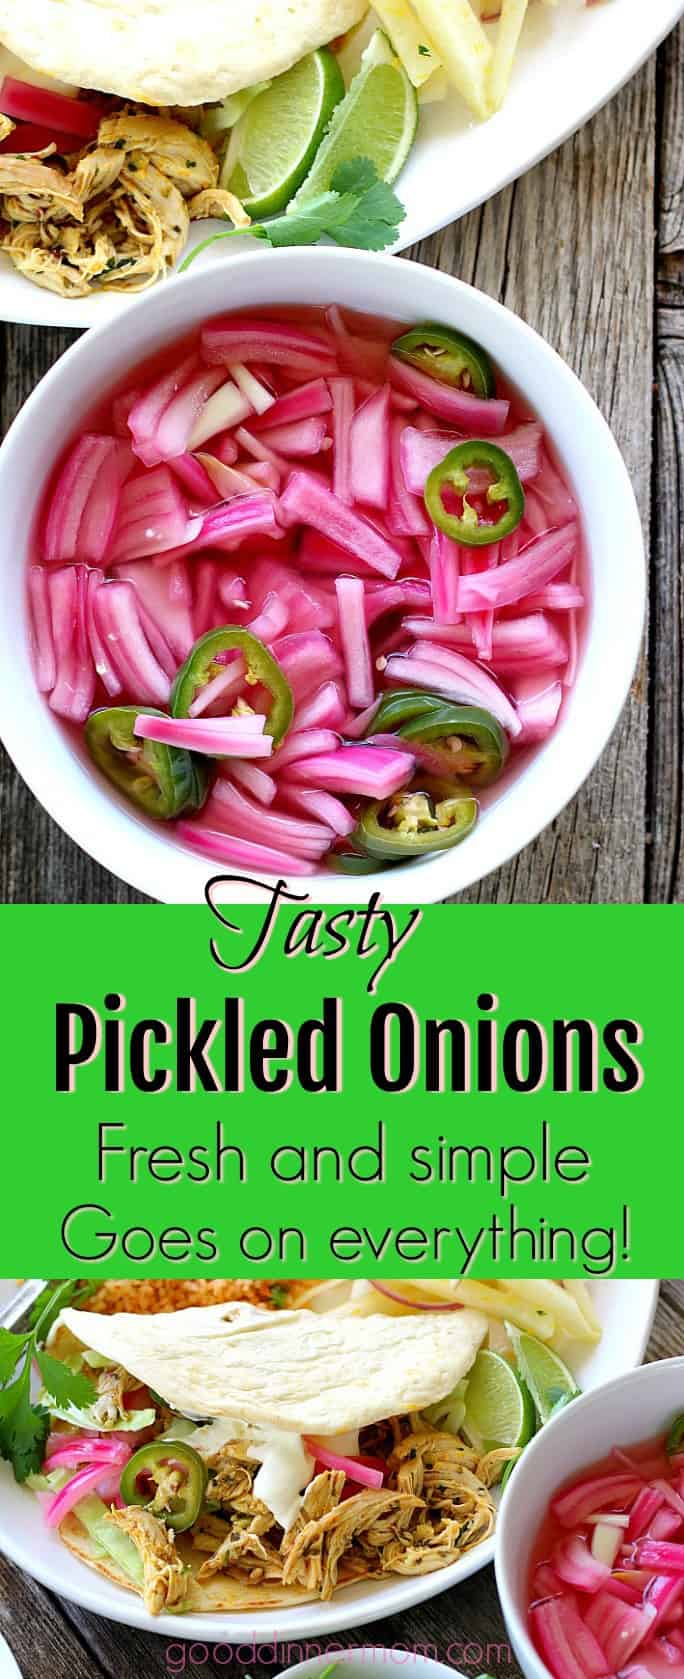 Tasty Pickled Onions pinterst pin